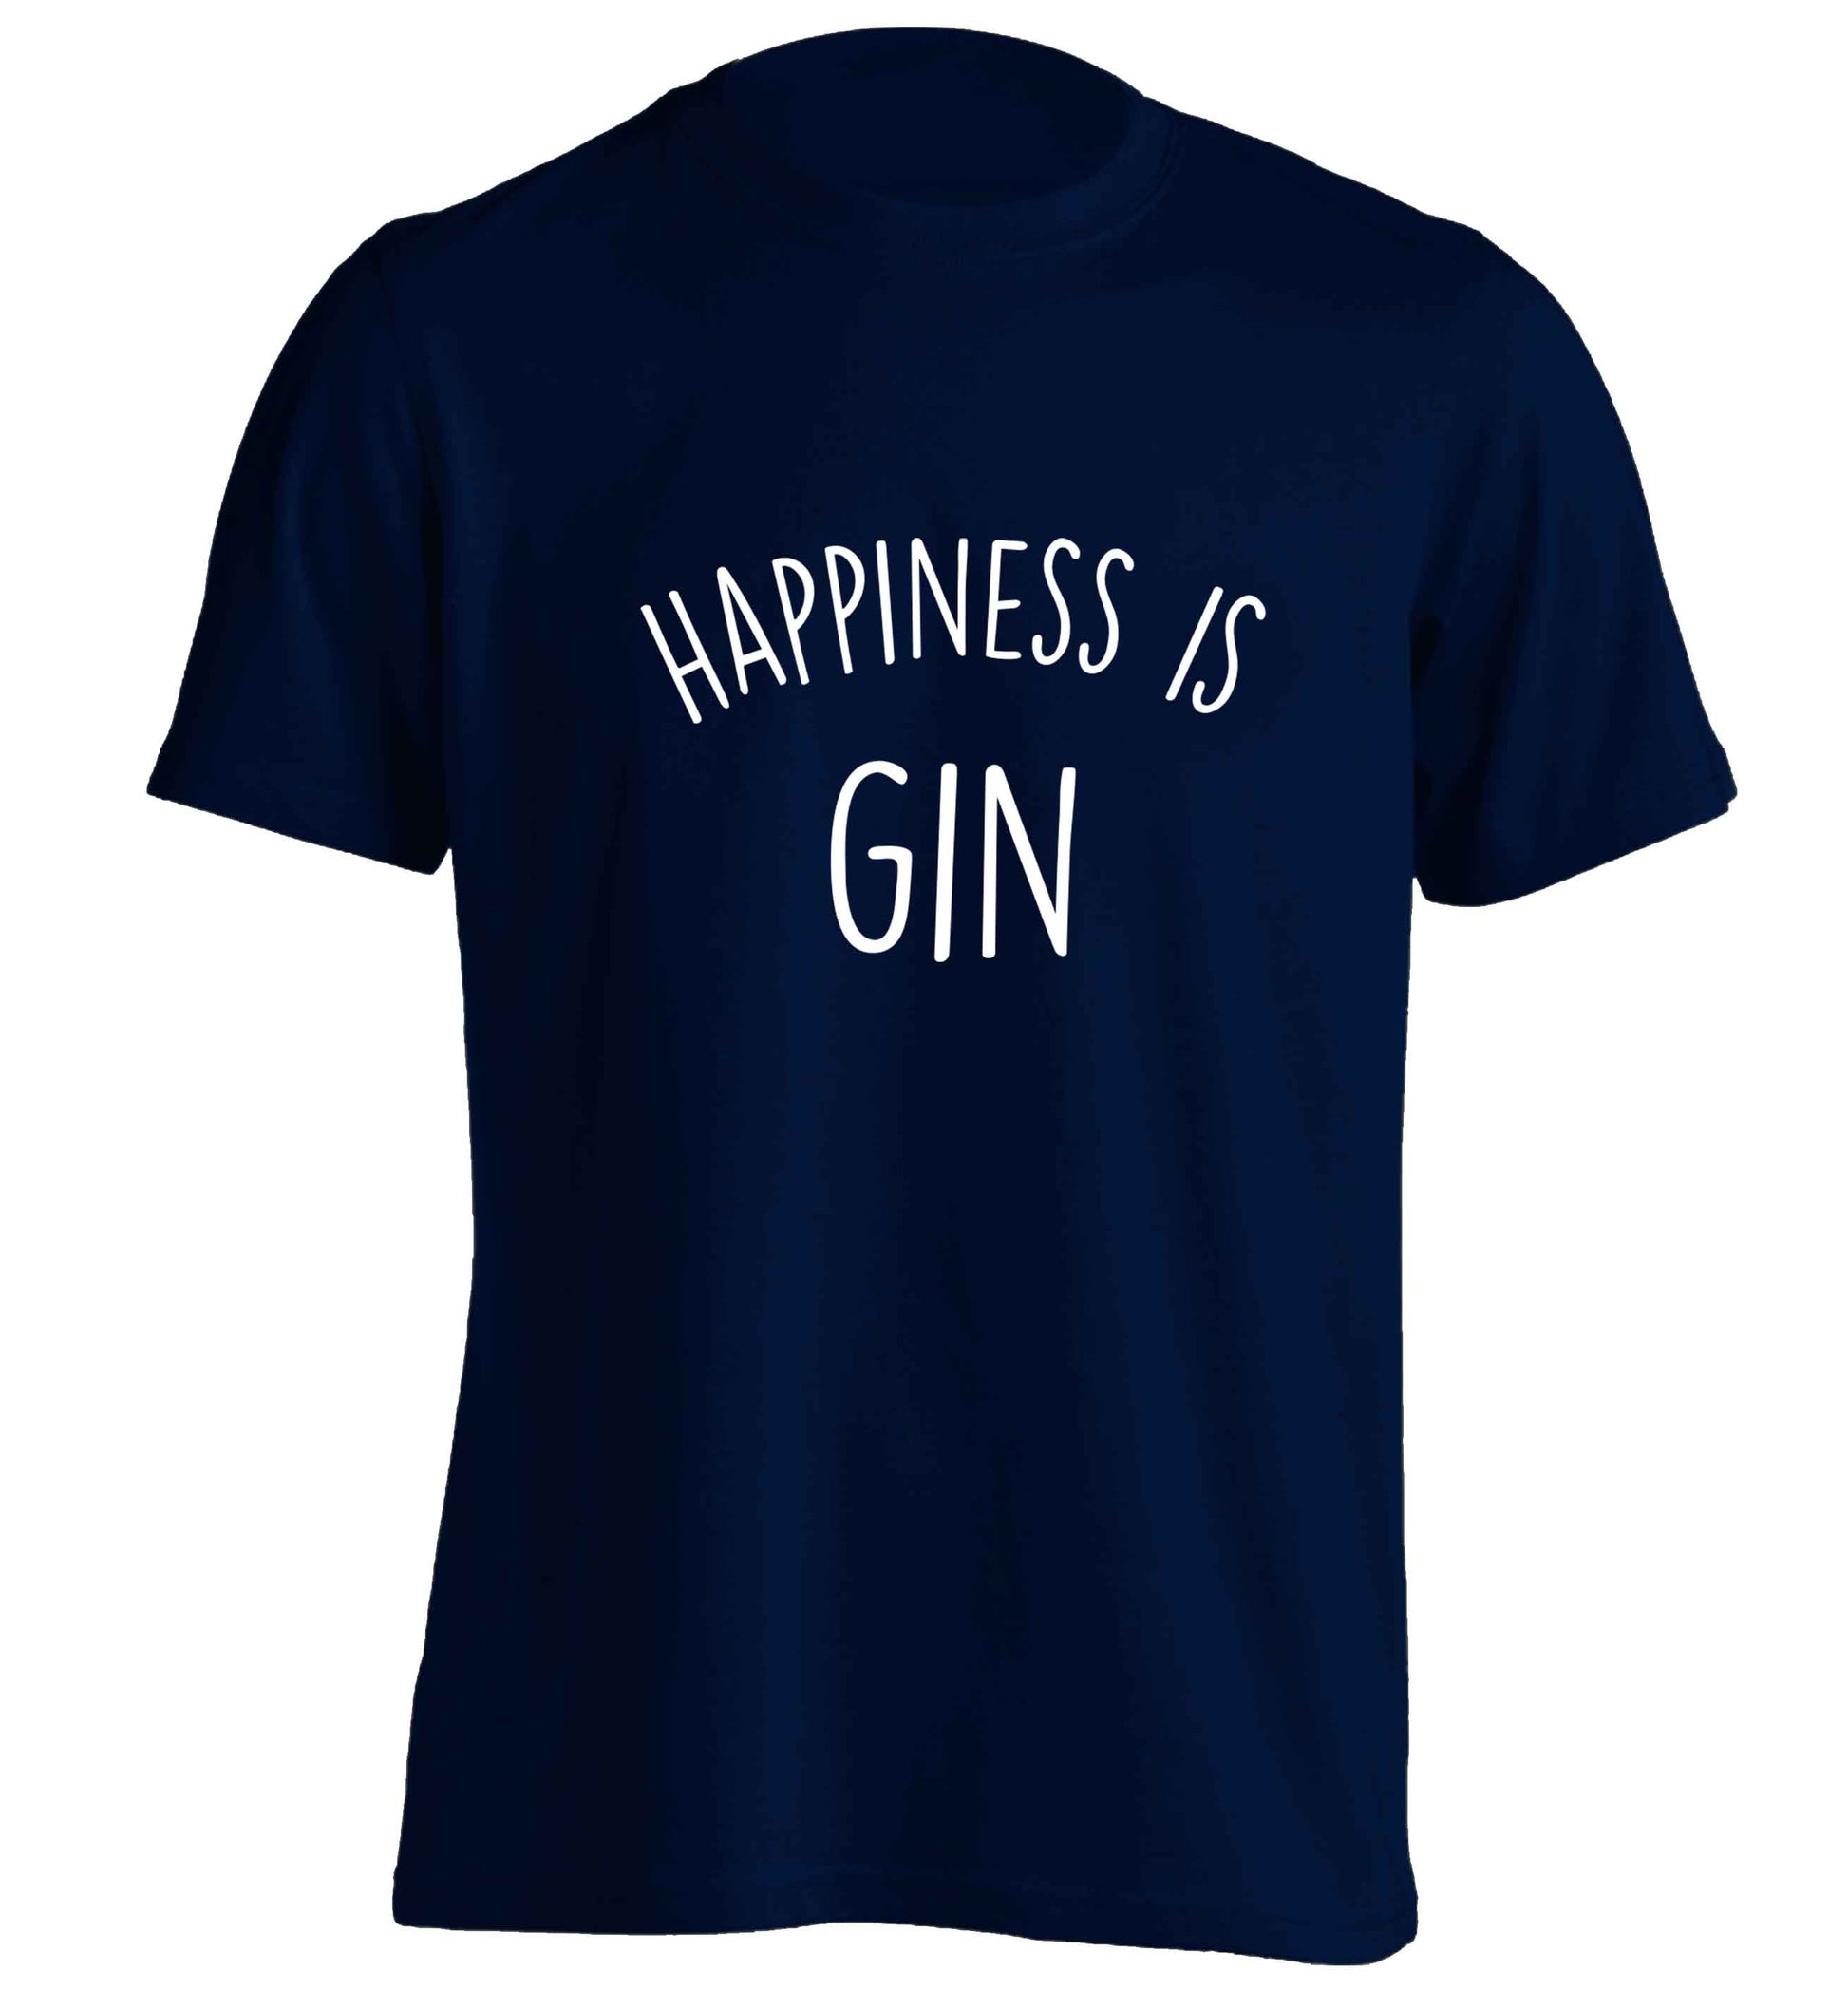 Happiness is gin adults unisex navy Tshirt 2XL